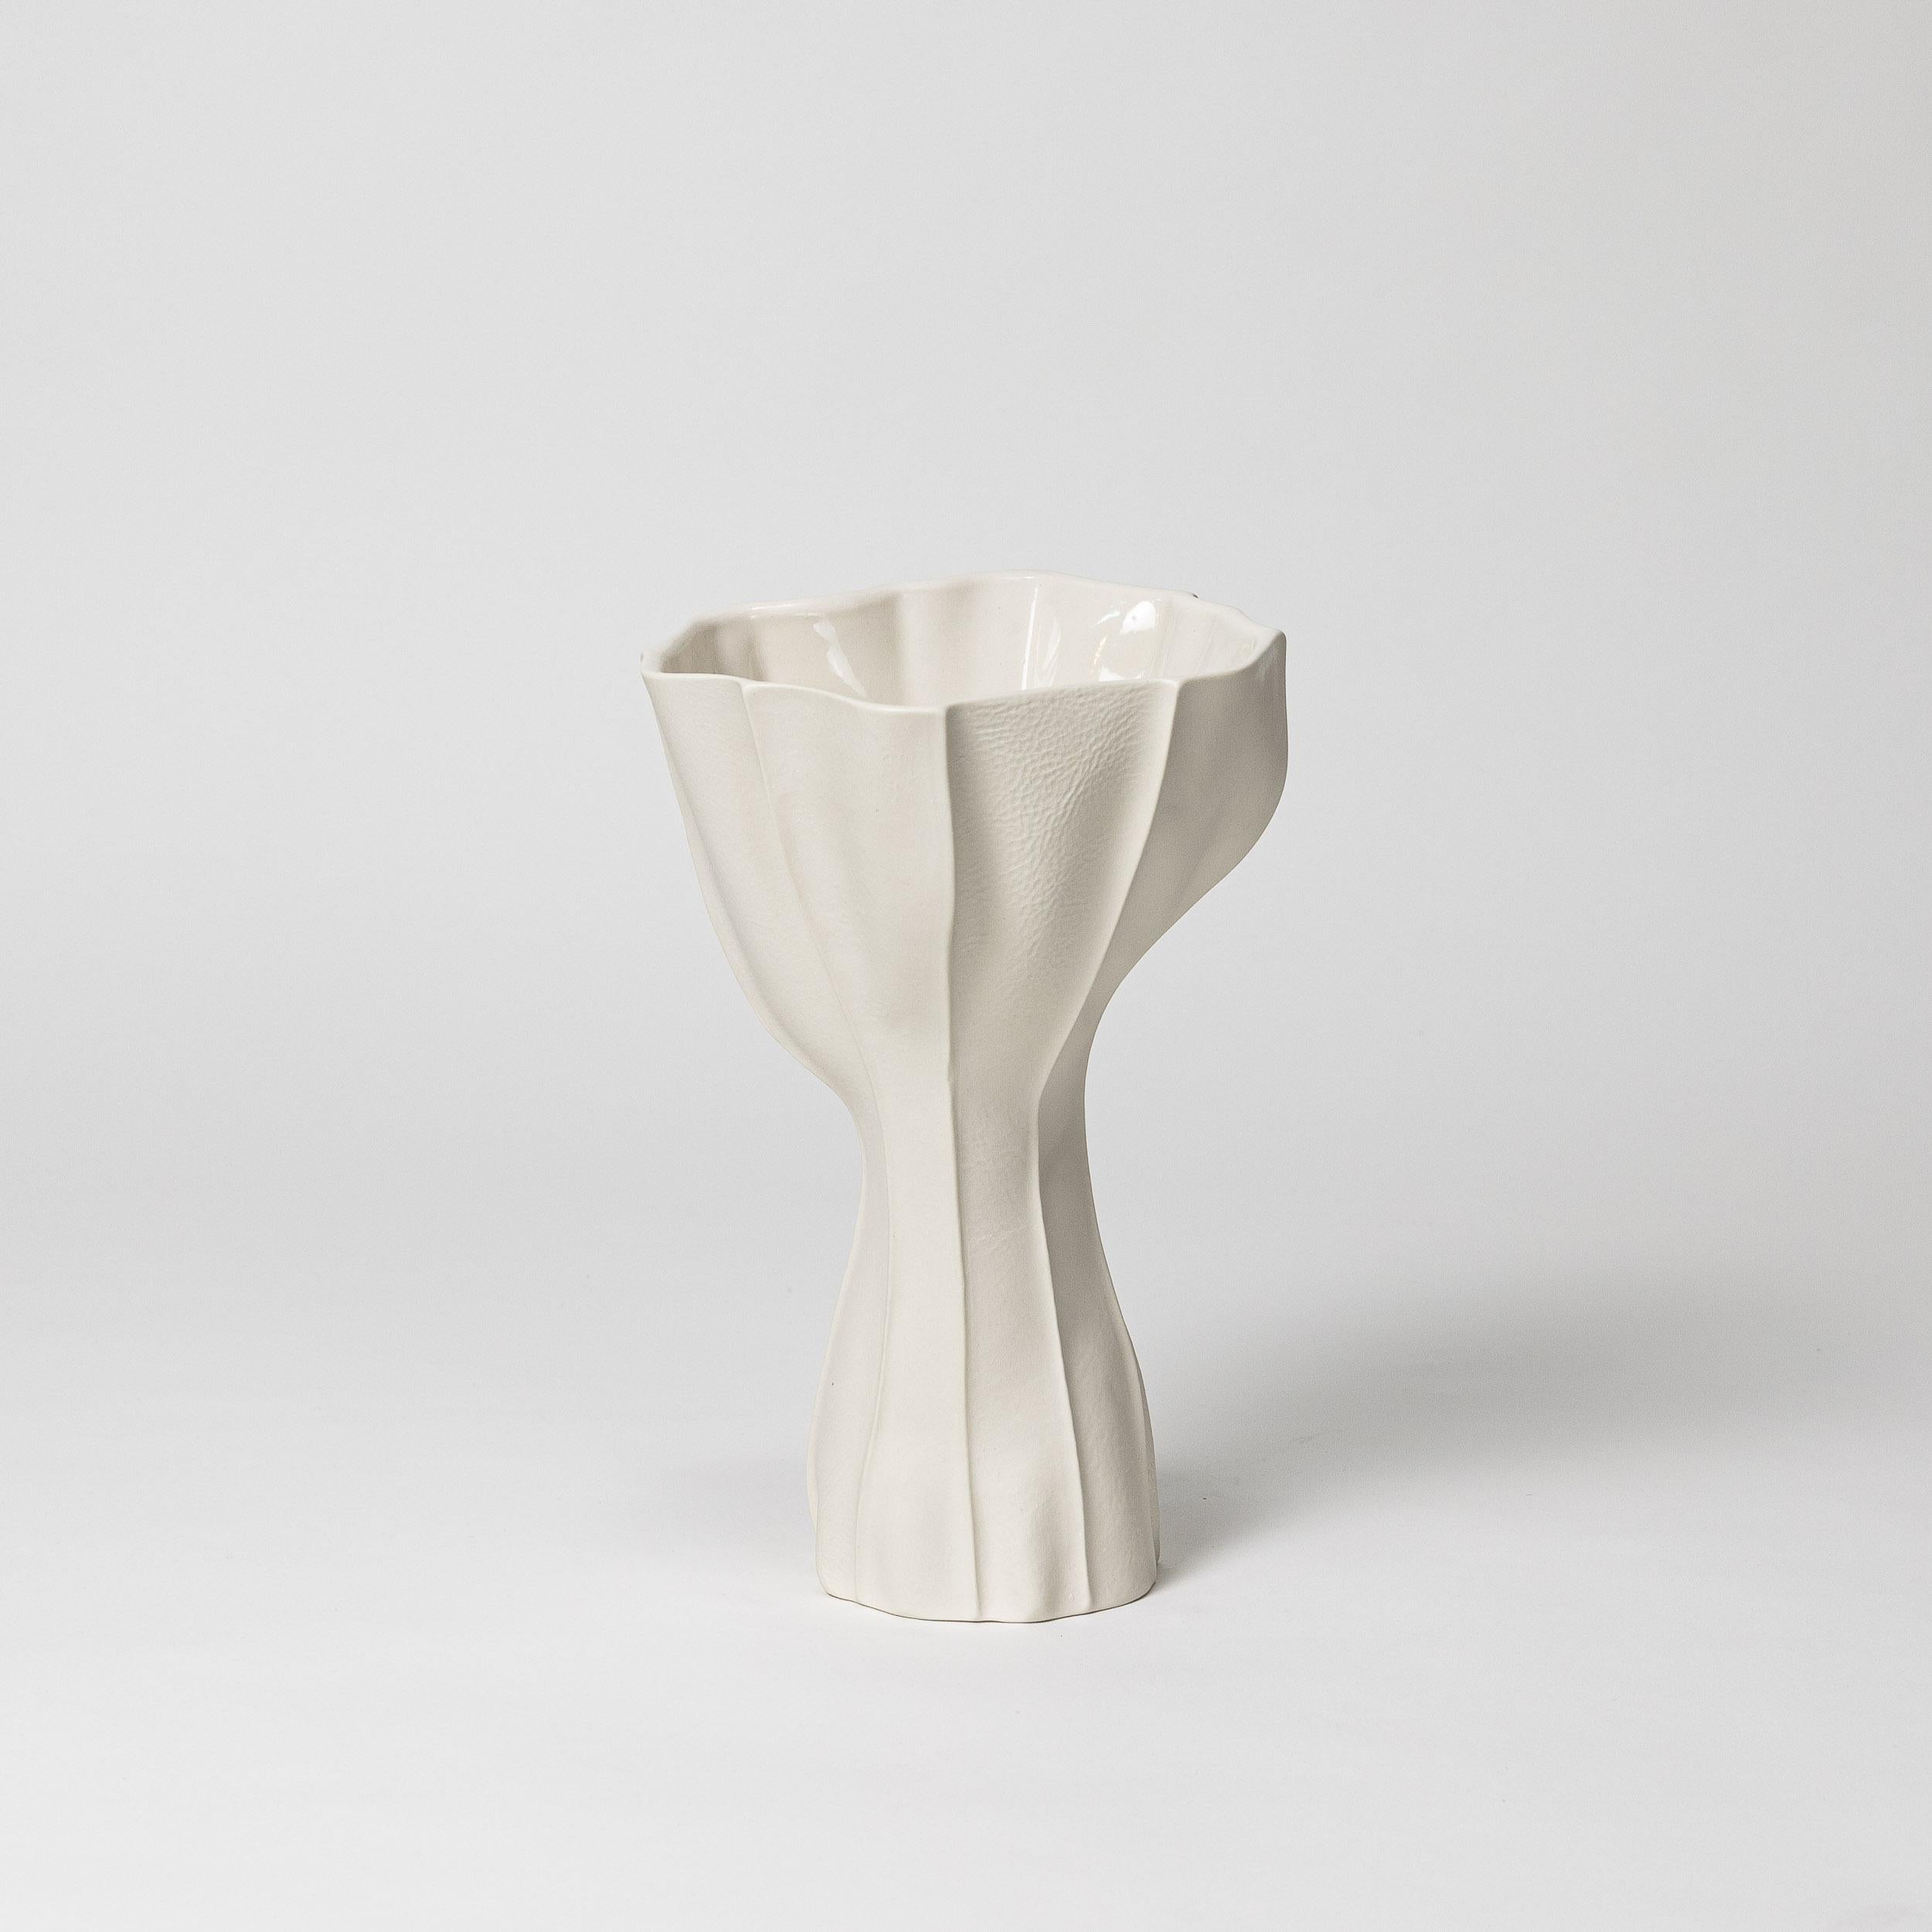 Other In-Stock, Organic Ceramic Kawa Vase 9.1, White, Textured, Sculptural, Porcelain  For Sale